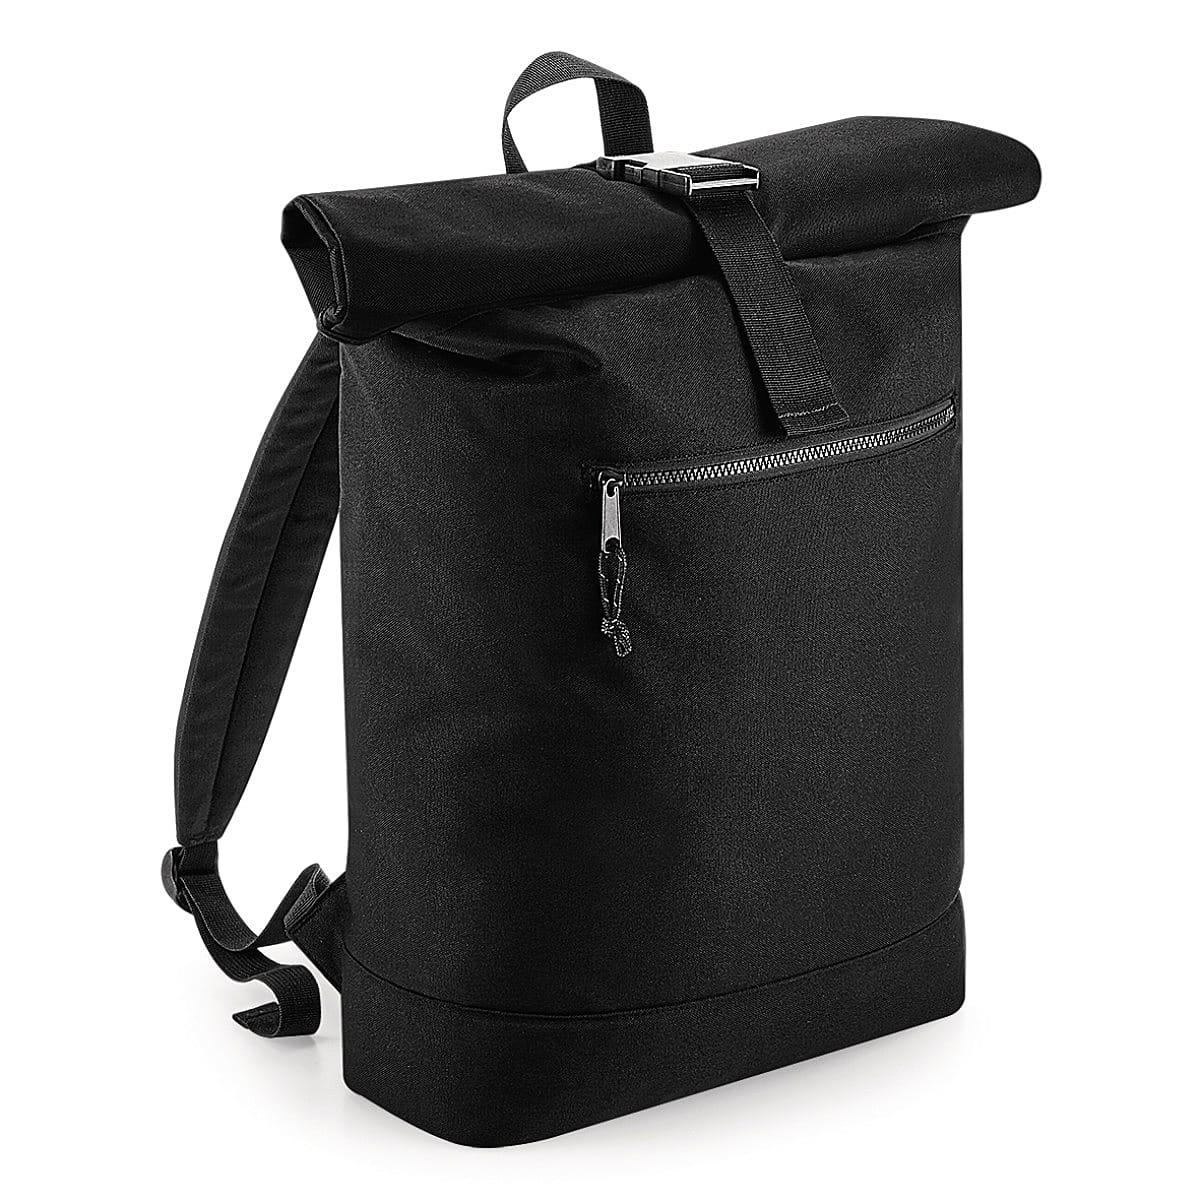 Bagbase Recycled Rolltop Backpack in Black (Product Code: BG286)